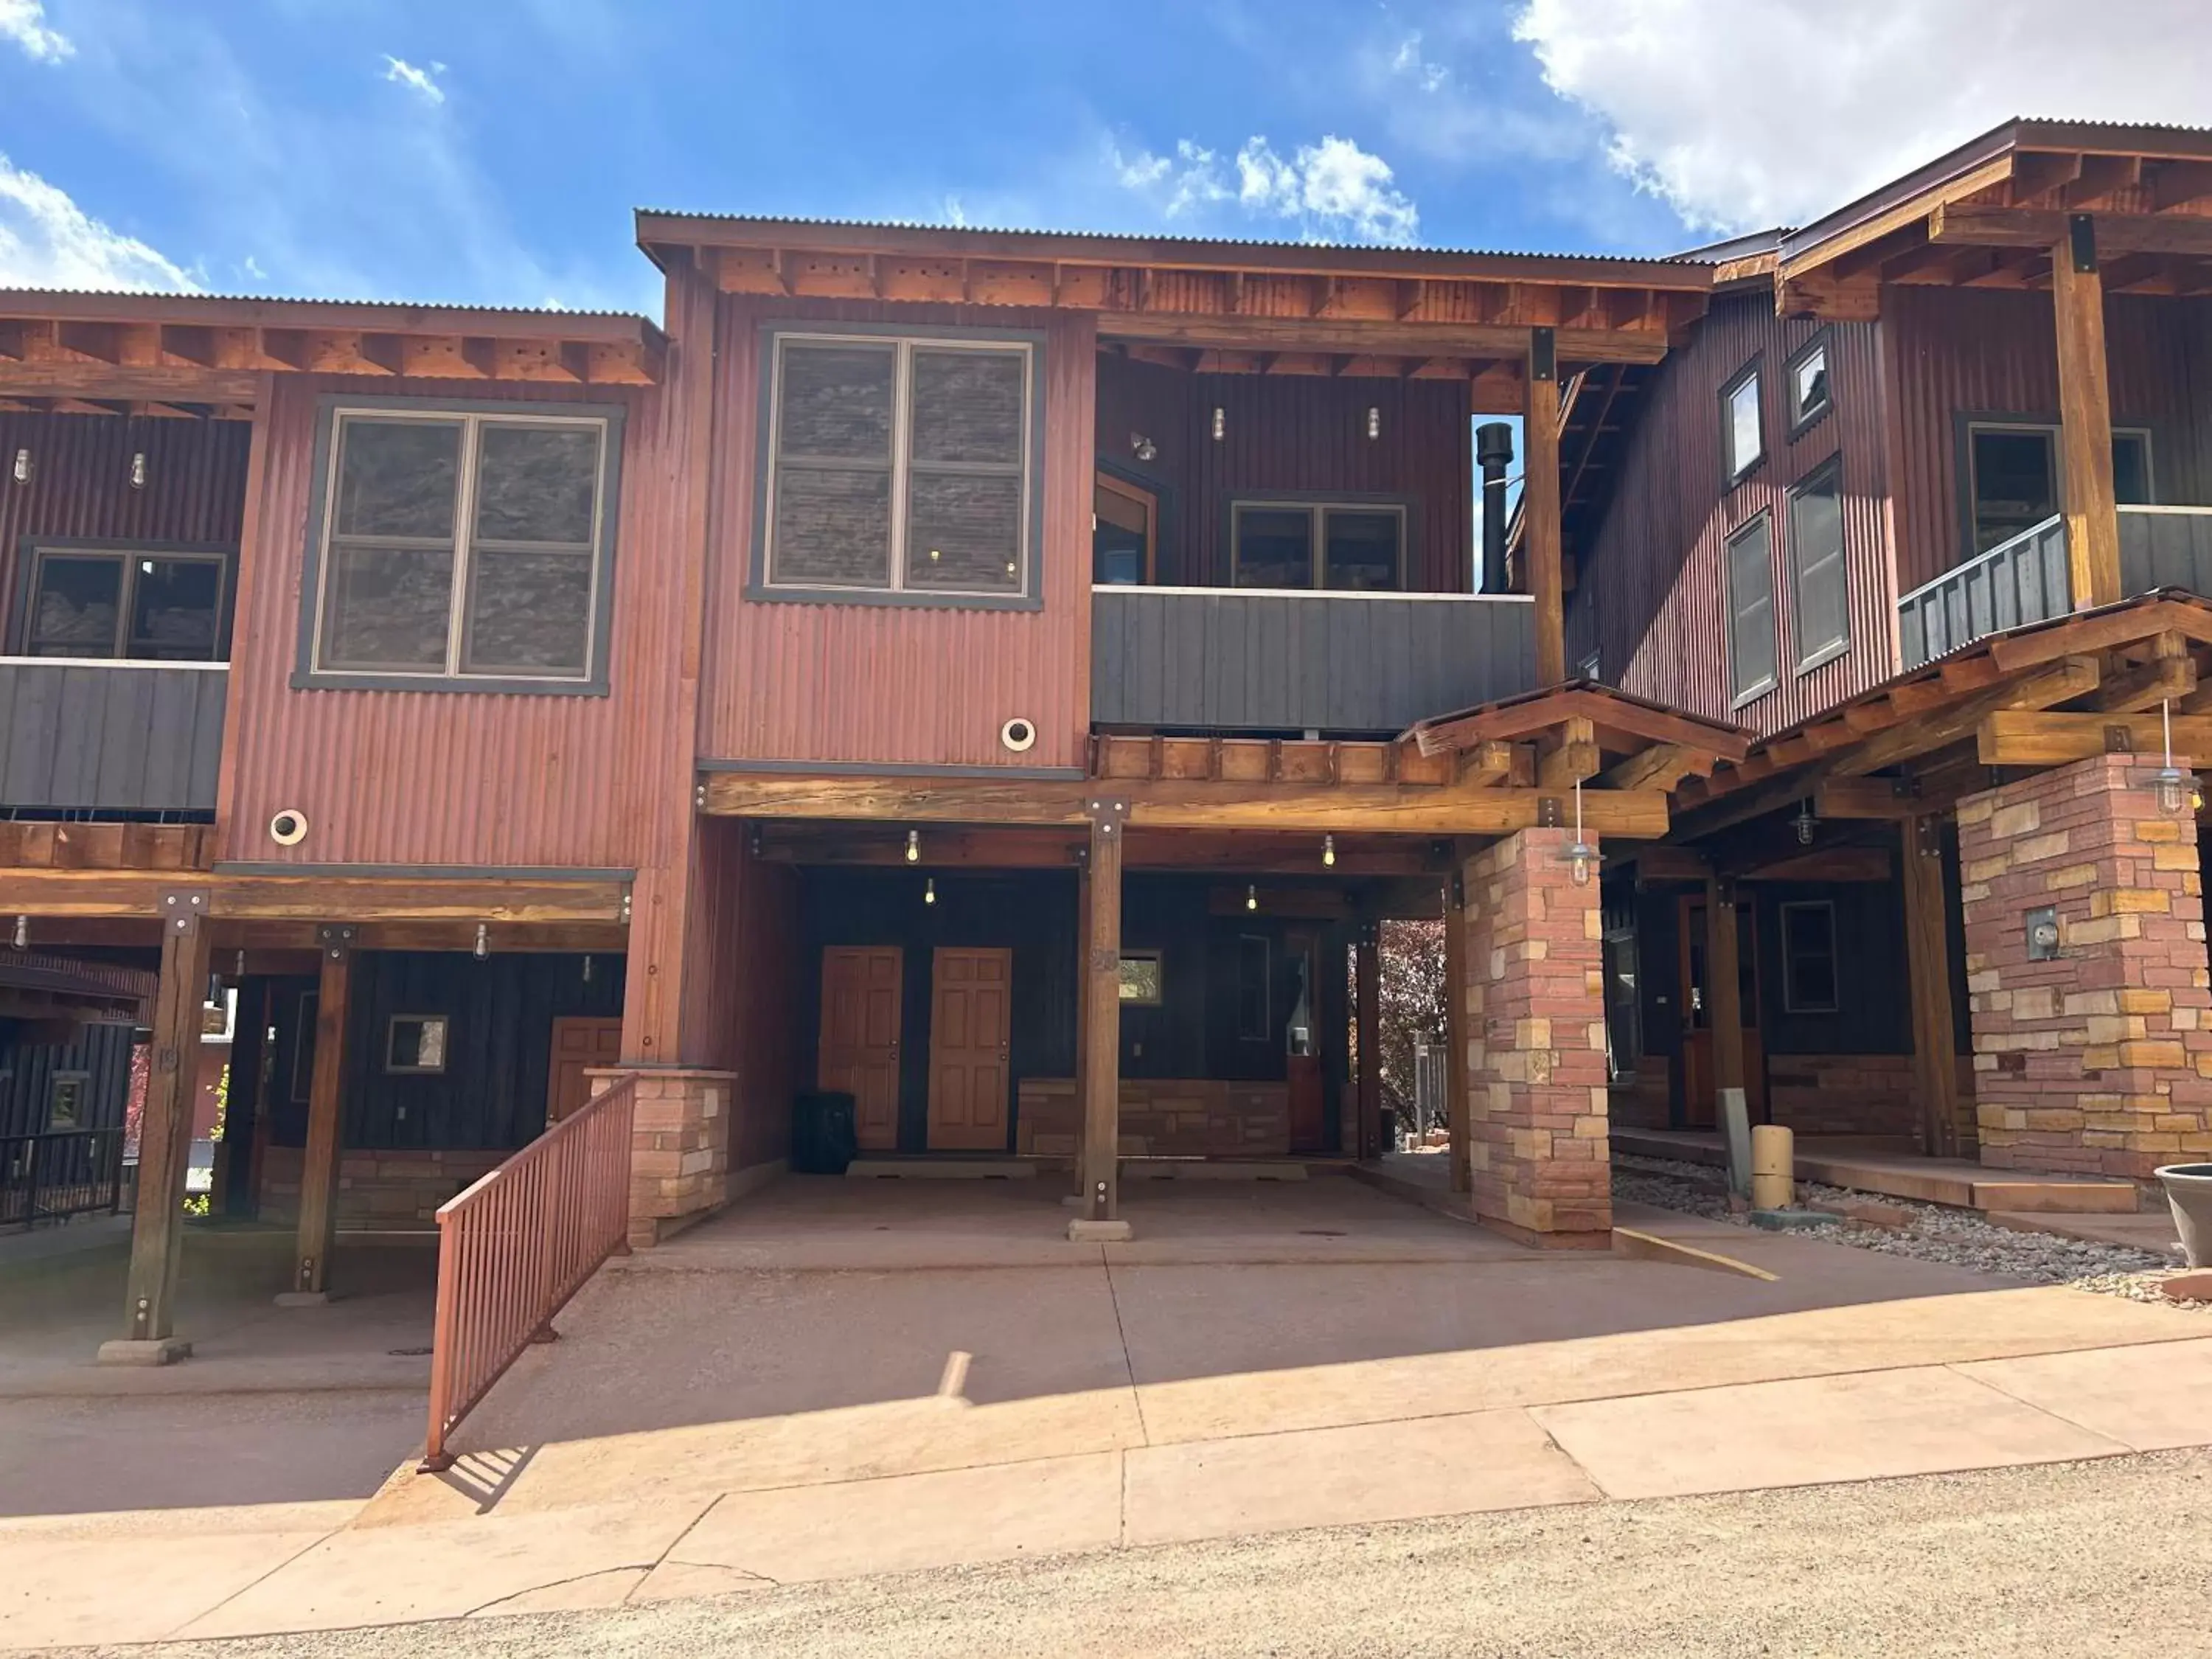 Property Building in Moab Springs Ranch